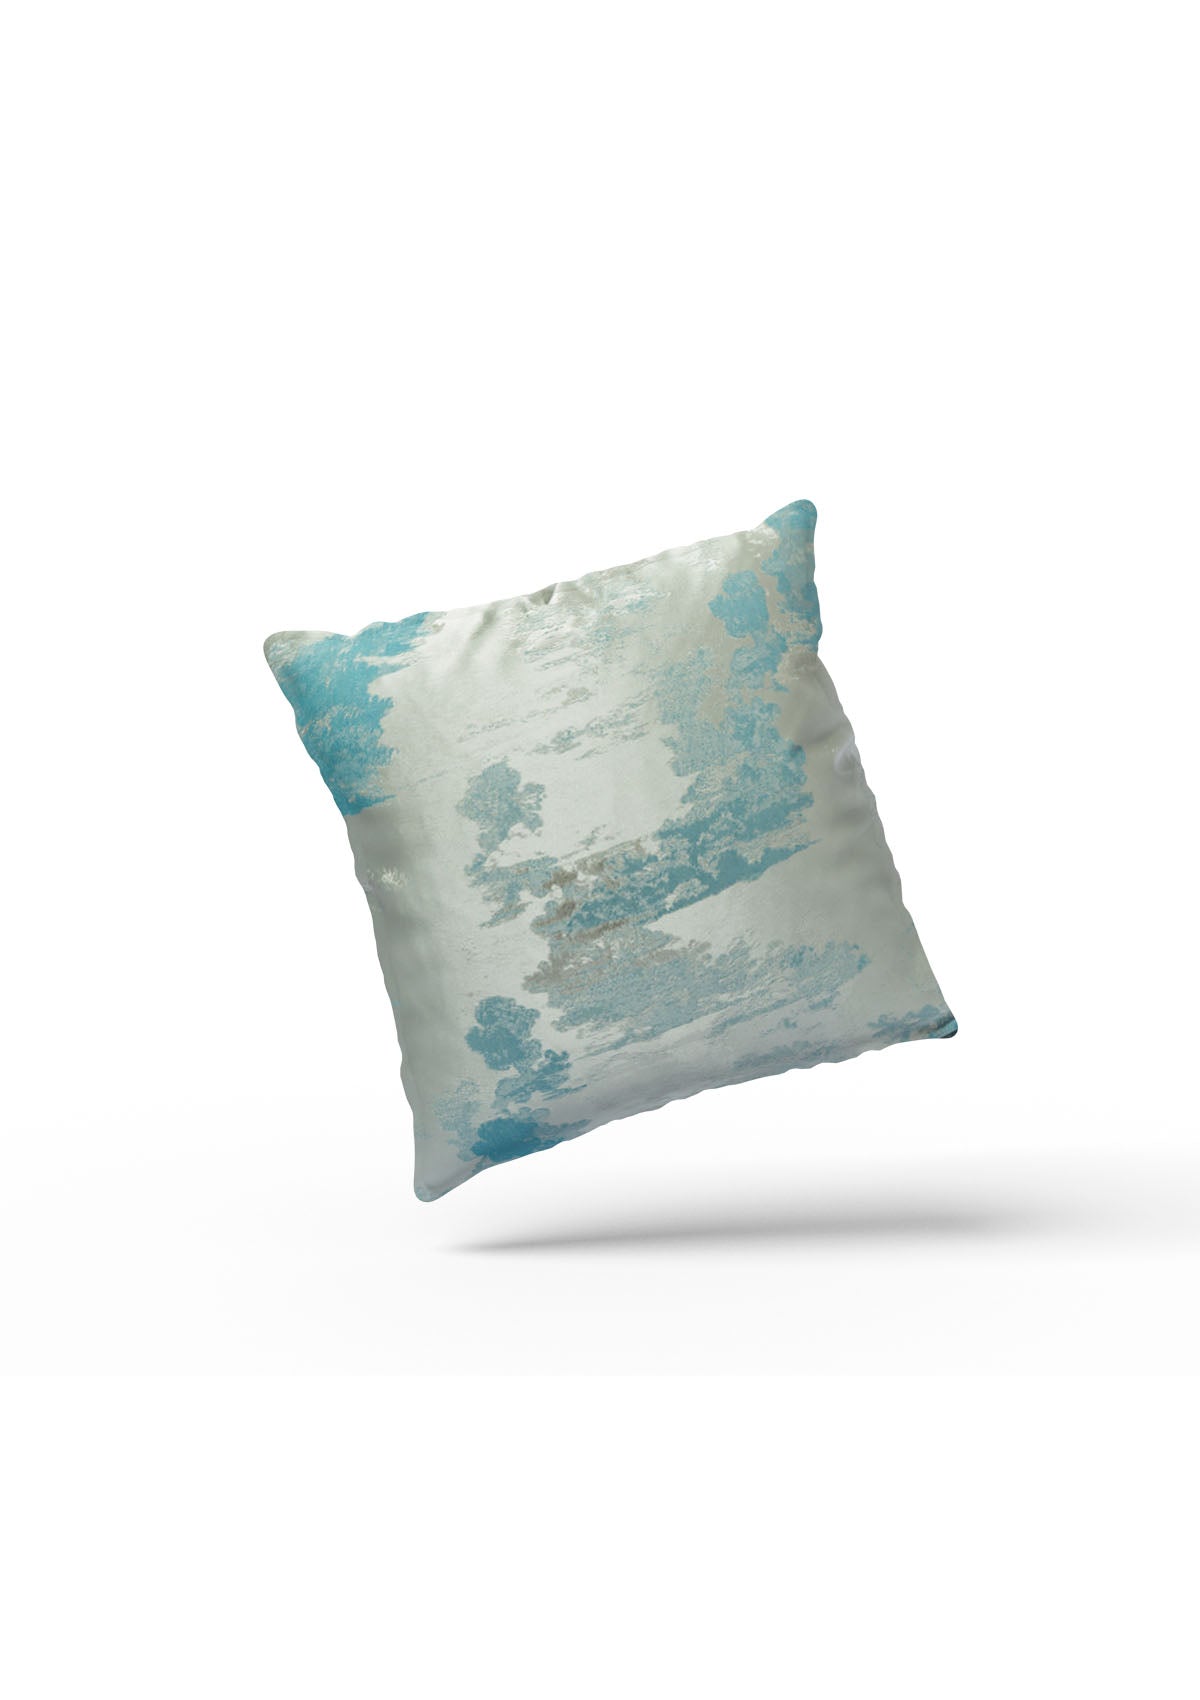 Teal and Silver Cushion Covers | CovermyCushion